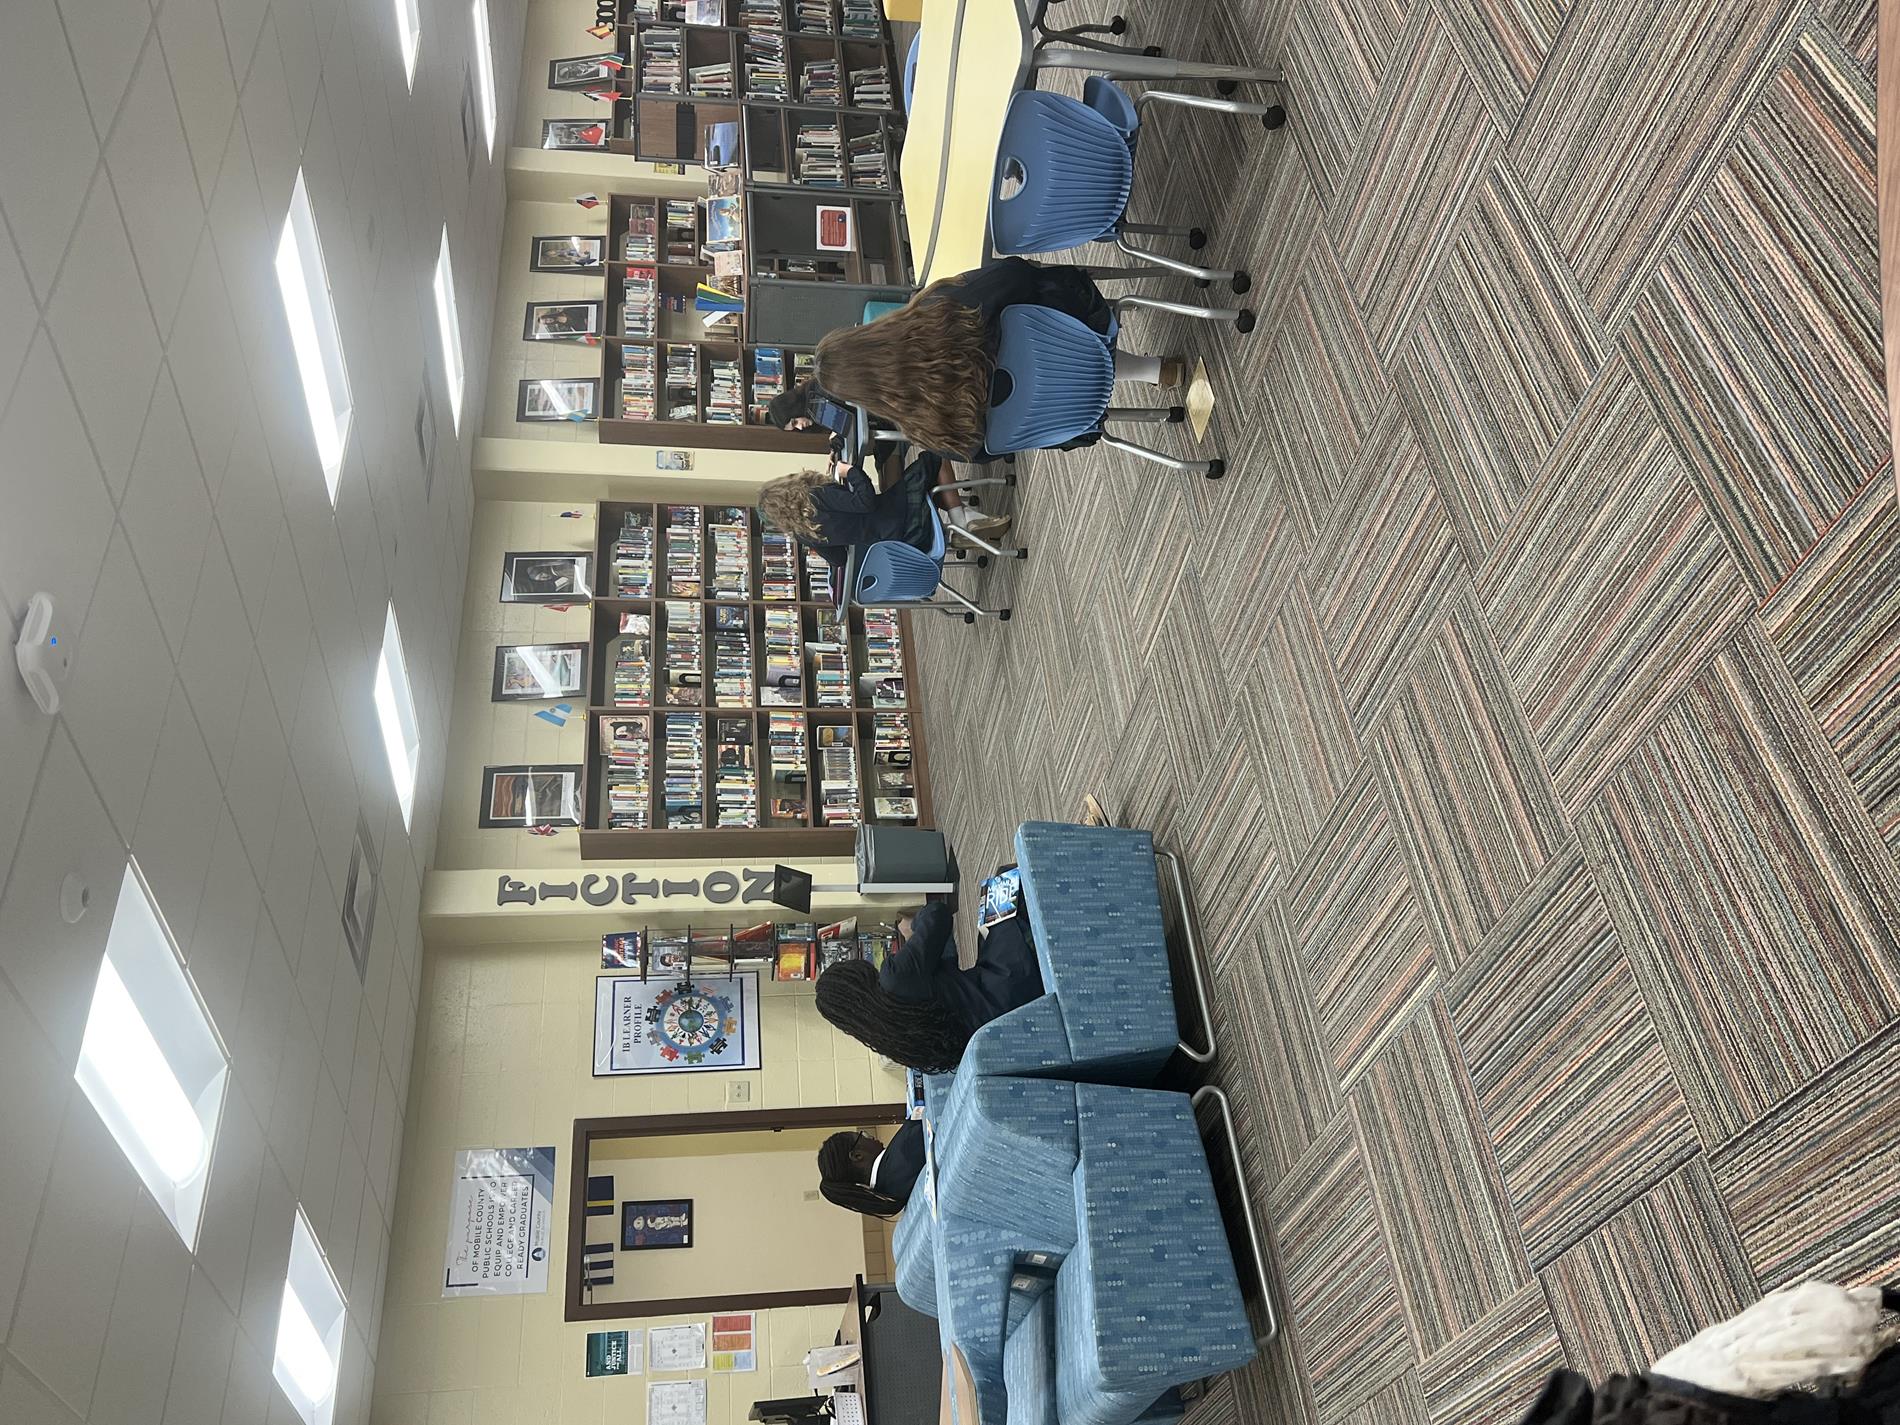 Students enjoying the library